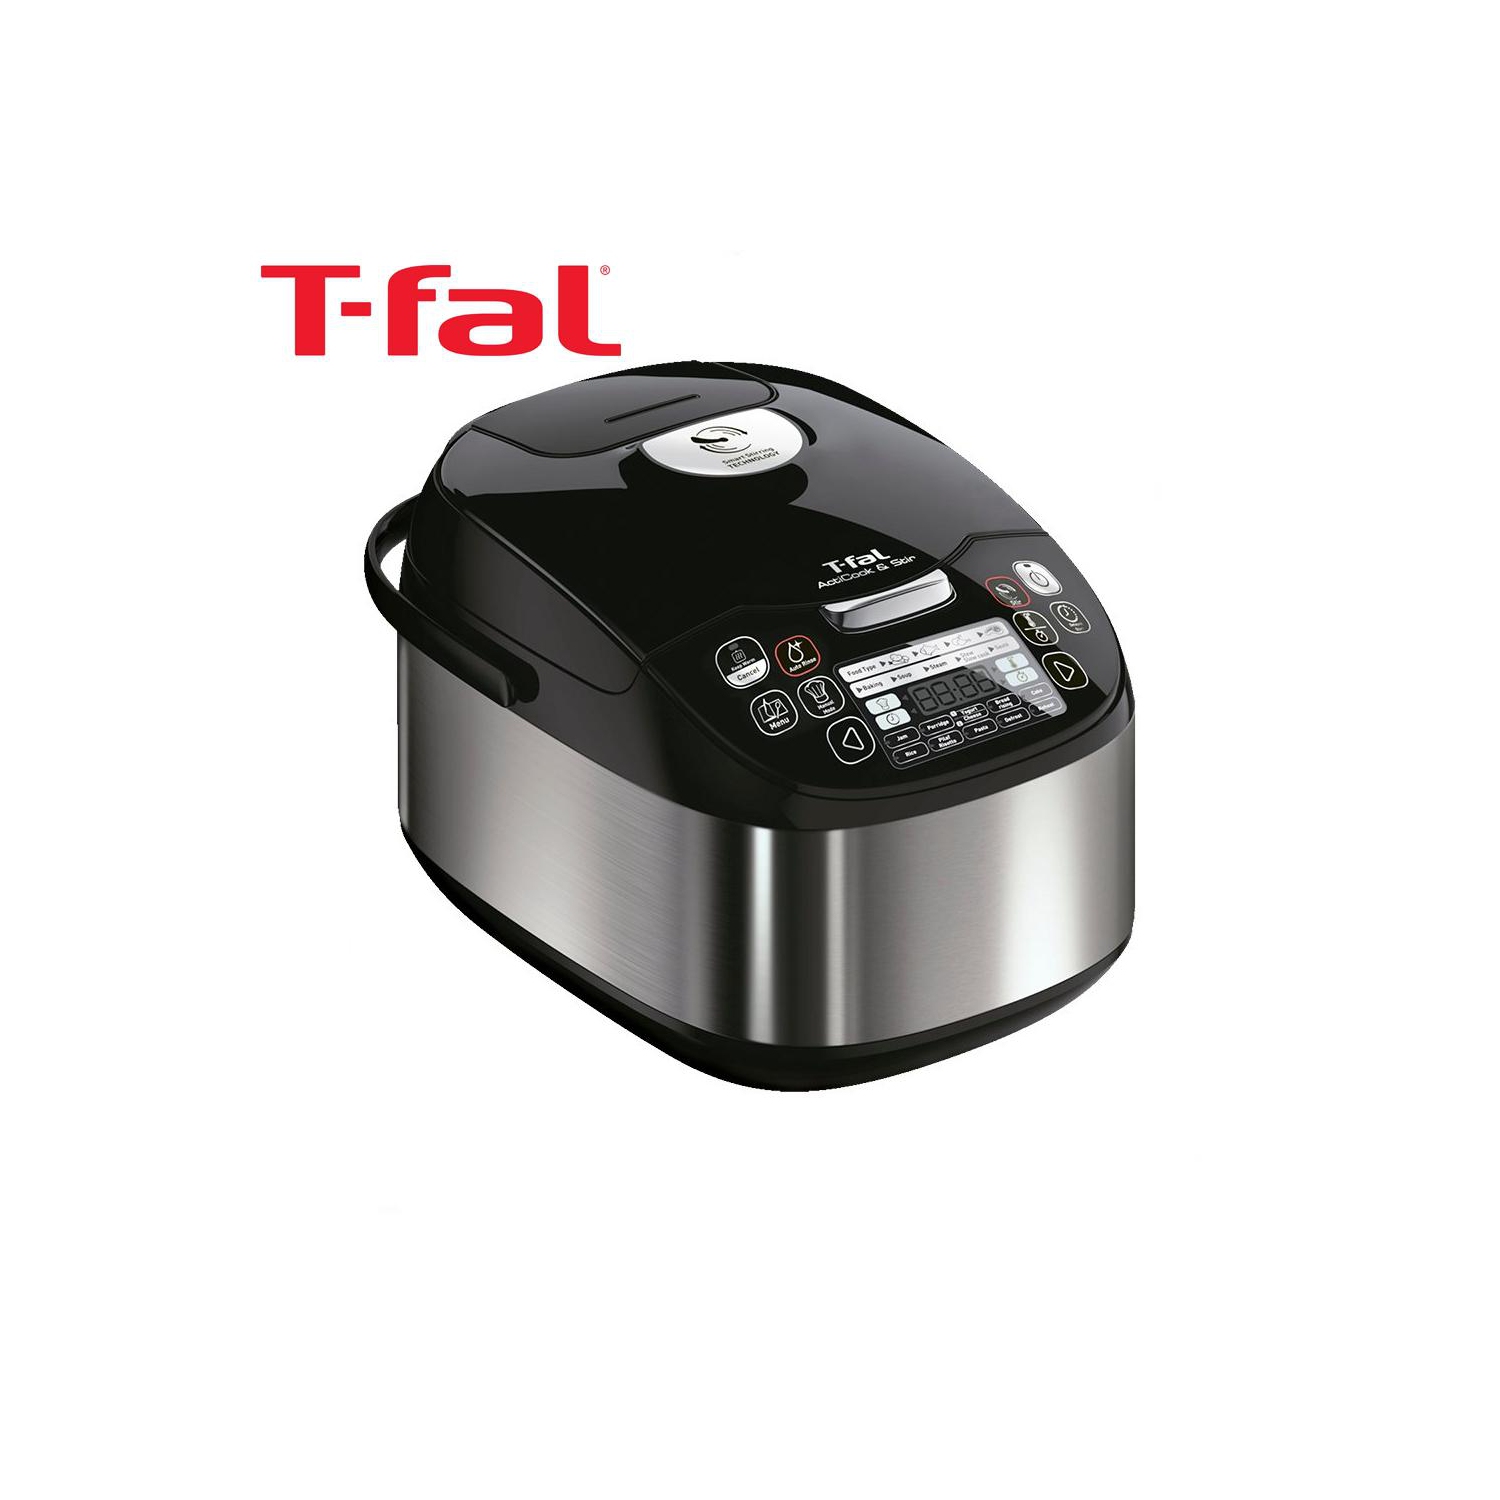 T-fal ActiCook and Stir One Pot Multicooker RK901B5-Open Box